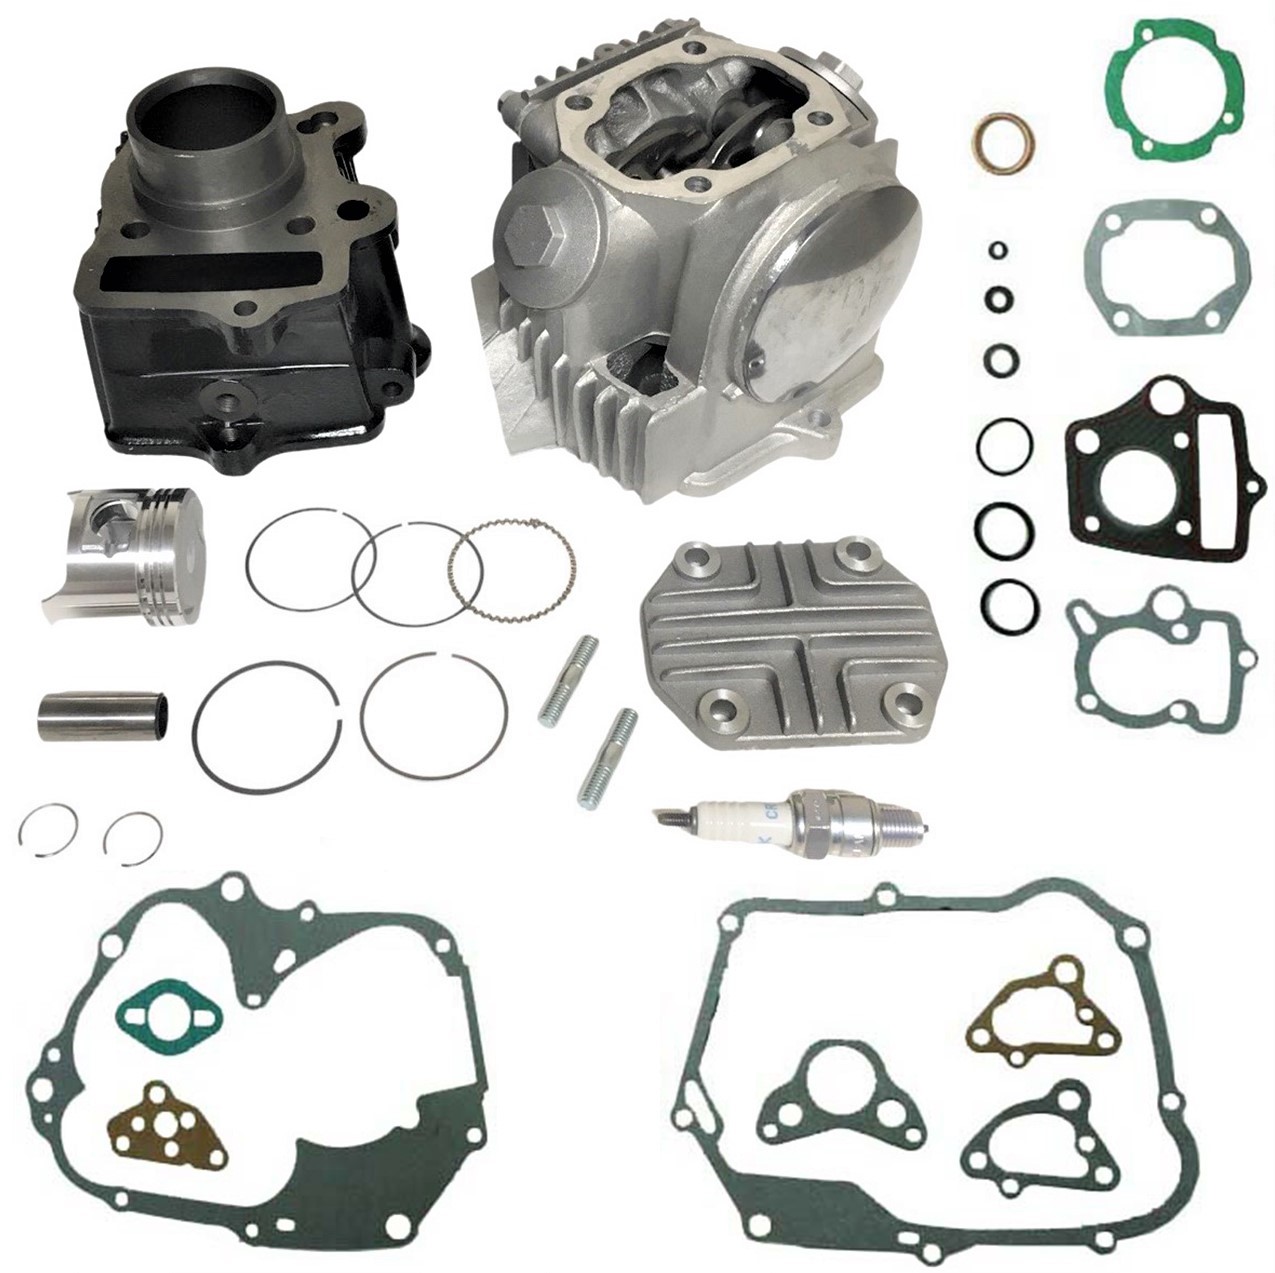 Cylinder & Head kit 50cc Chinese ATVs and Dirtbikes